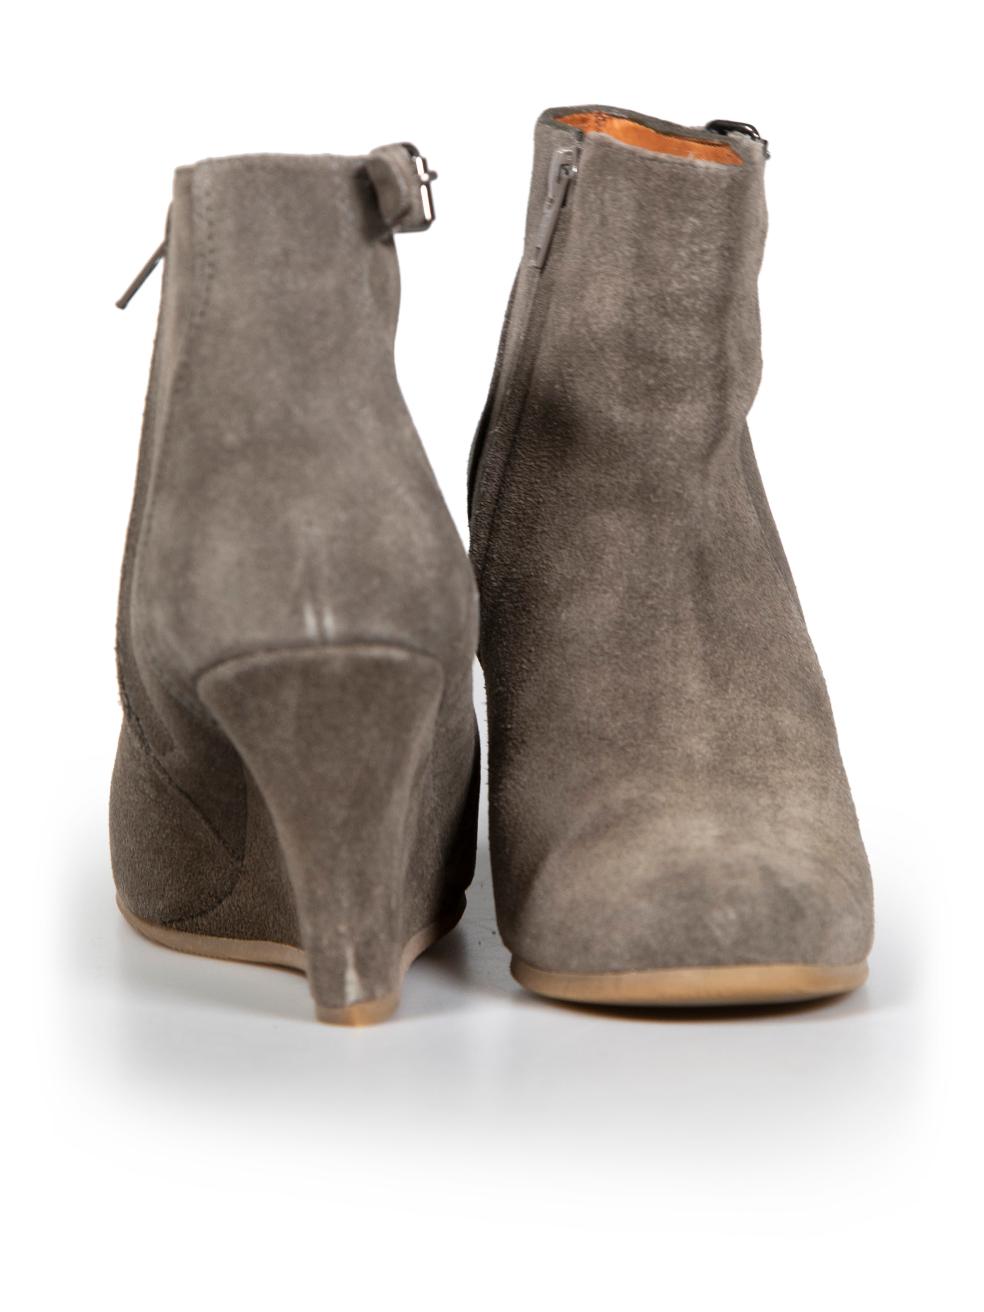 Lanvin Grey Ankle Suede Wedge Boots Size IT 36 In Good Condition For Sale In London, GB